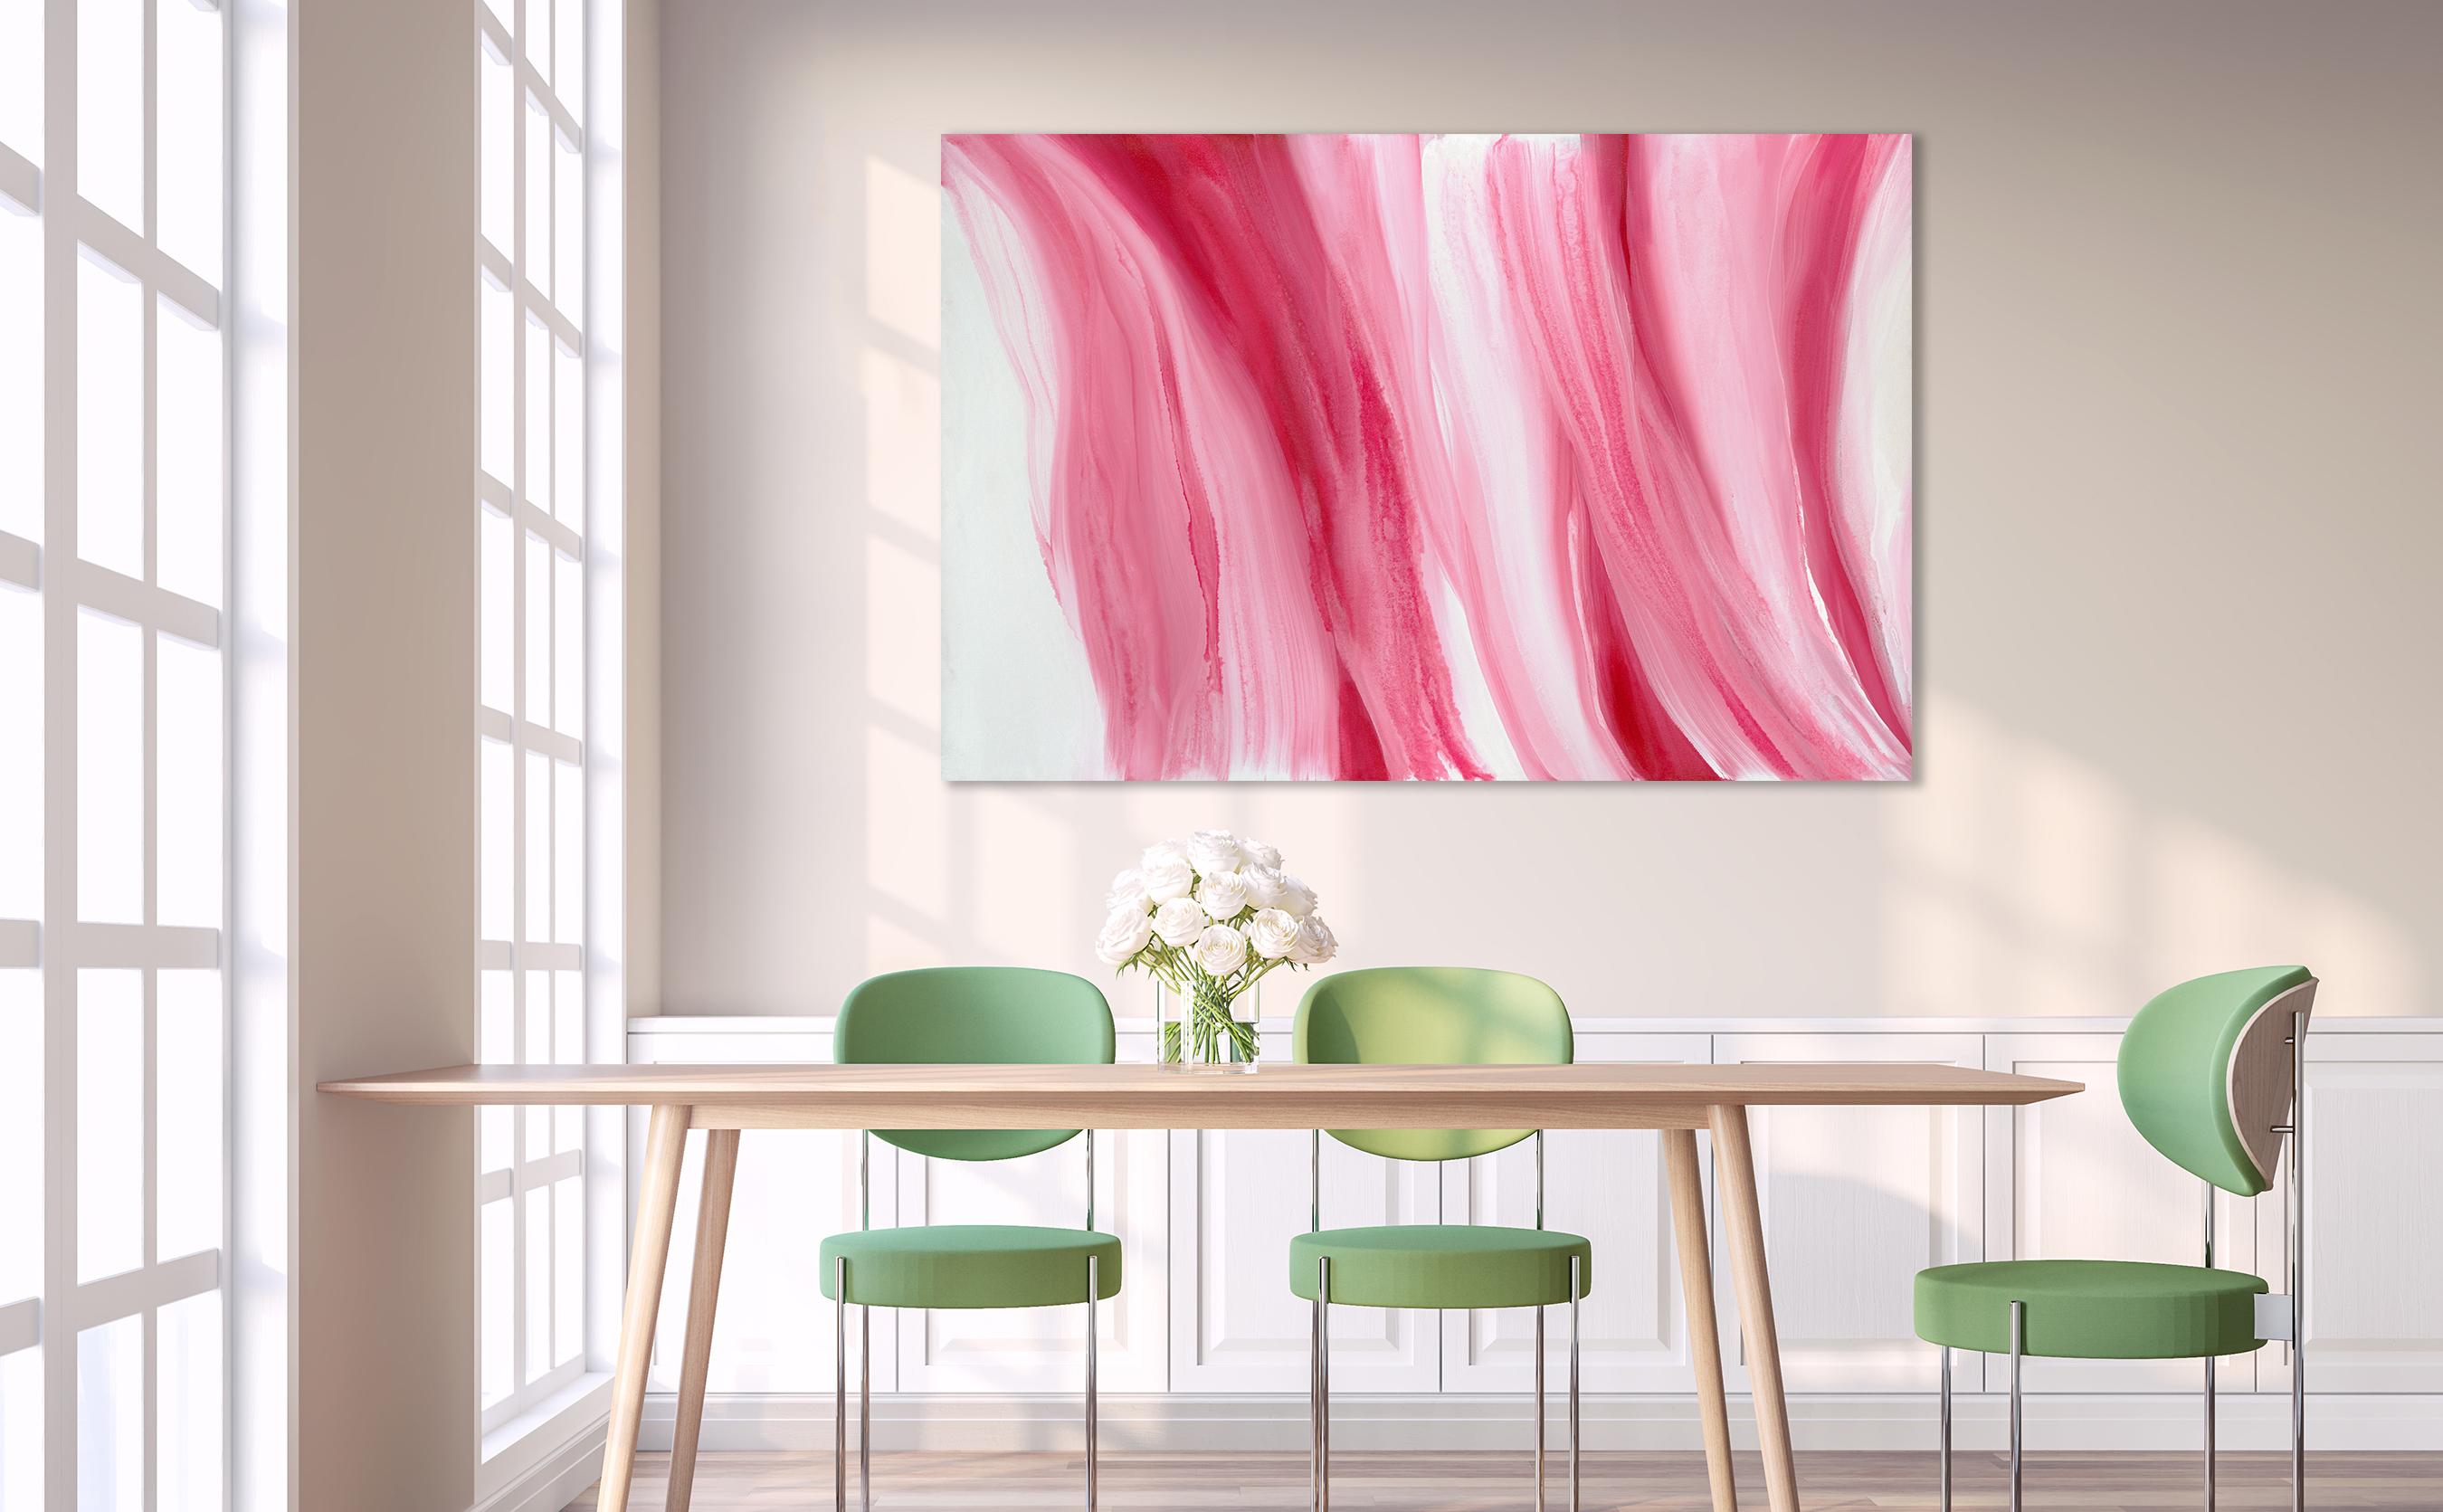 red, pink, white, stripes, relaxing, calm, tranquil, water, movement, chiffon, fabric, layers, texture, living room, dining room, office, large abstract, large art, statement, wow, decor, modern, contemporary, contemporary art, modern art.

Teodora